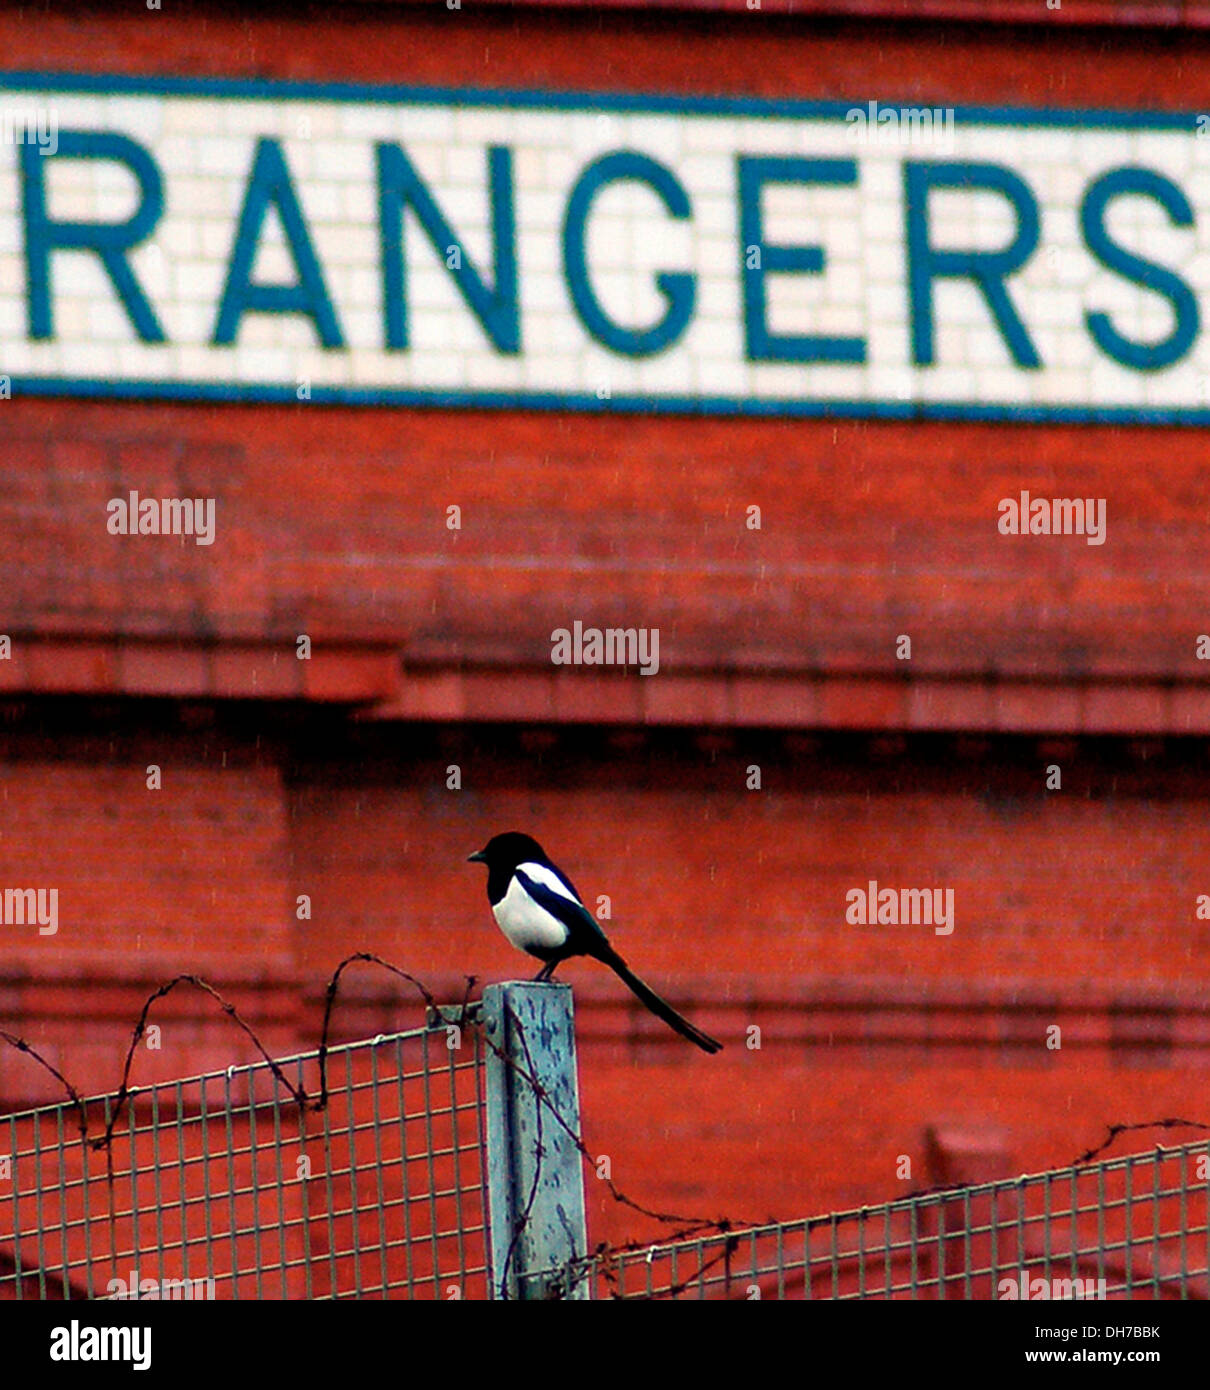 A single Magpie symbolising one for sorrow as old superstition goes Rangers Football Club - Ibrox Stadium Glasgow Scotland - Stock Photo